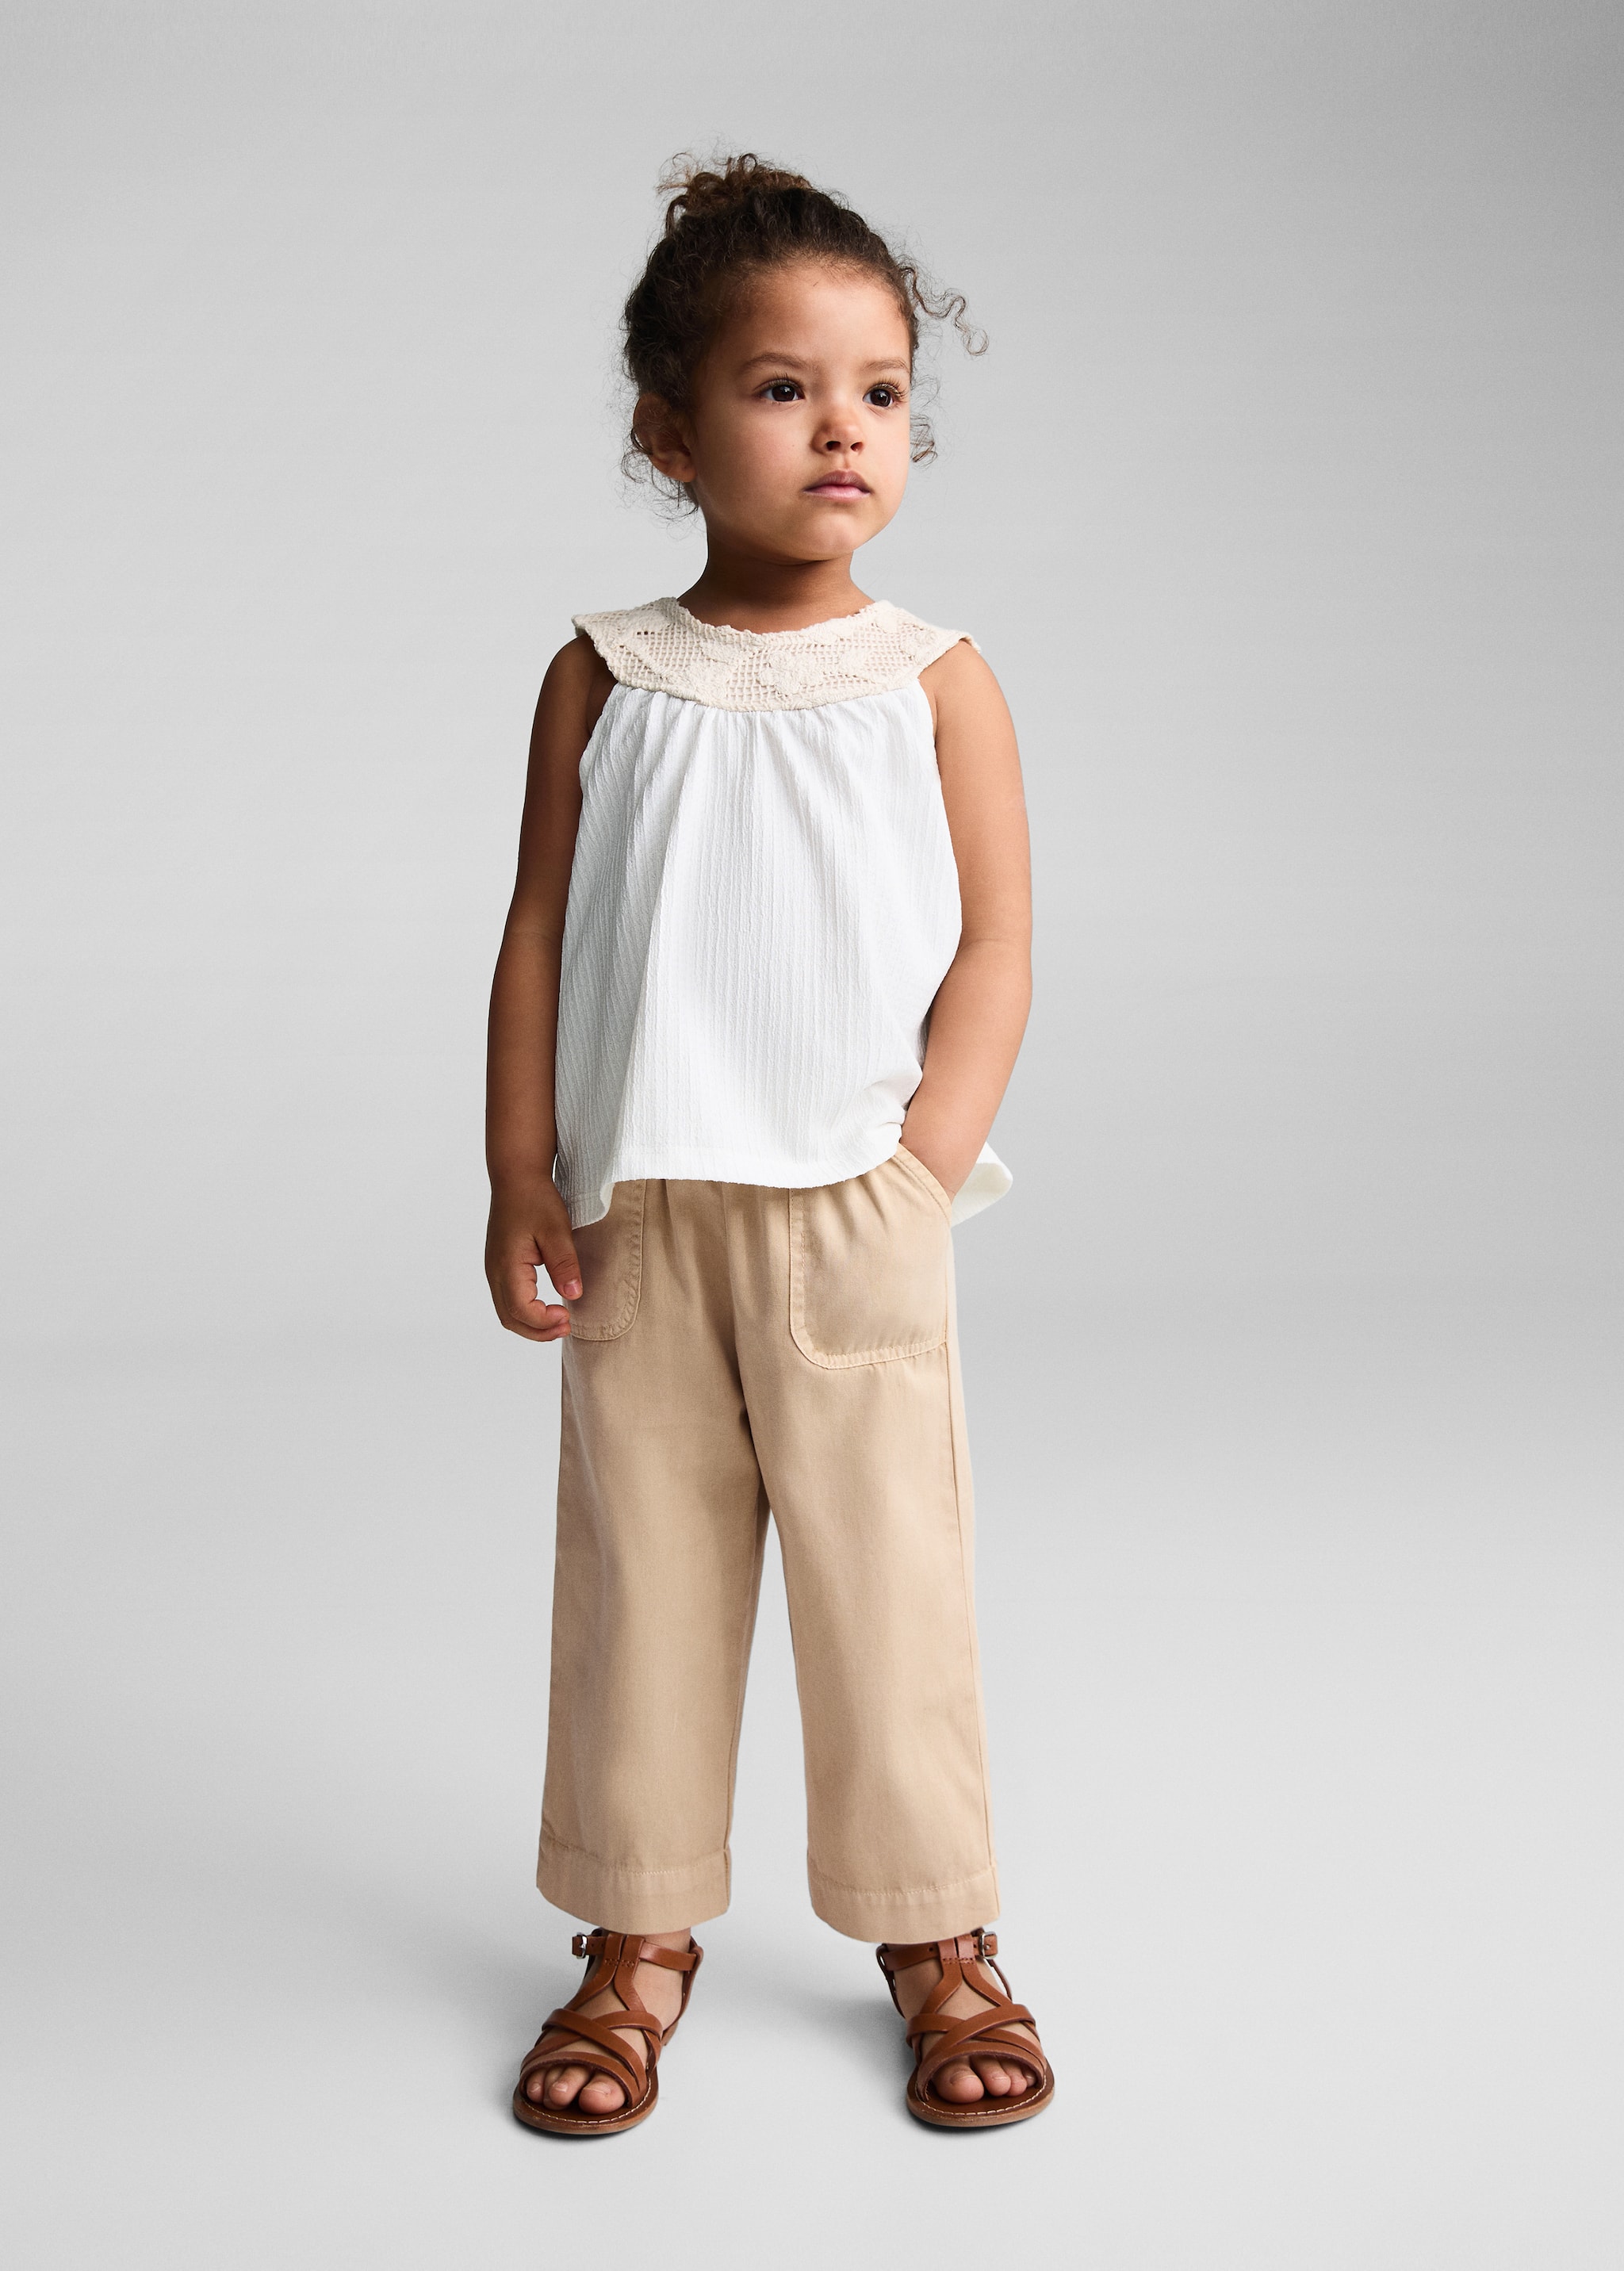 Natural-dye trousers with pockets - General plane